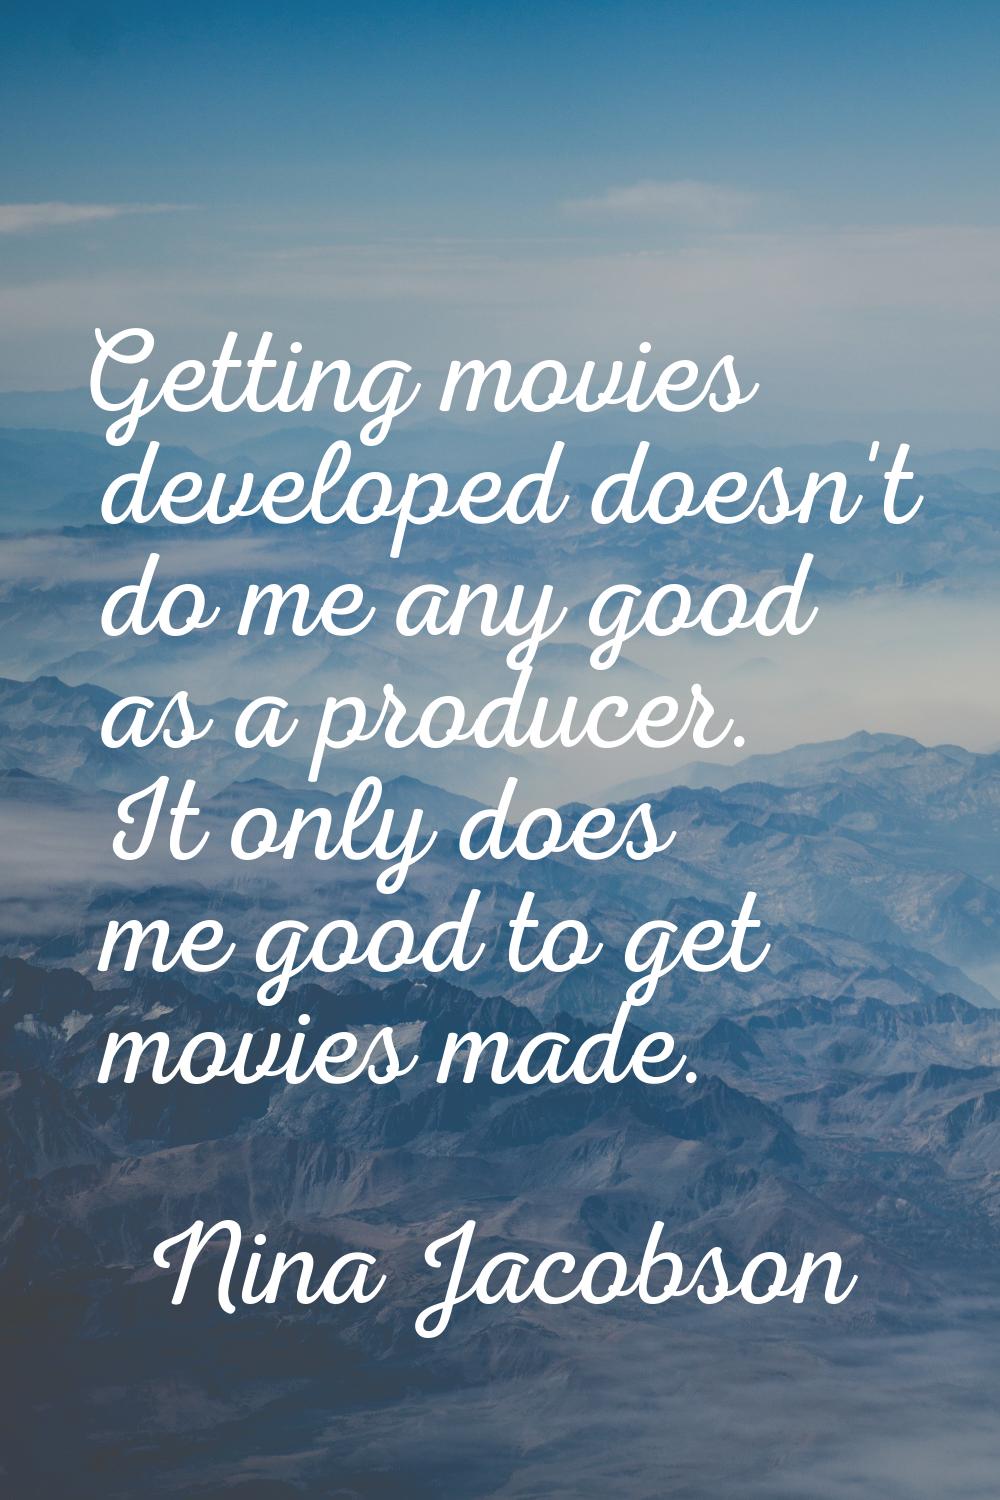 Getting movies developed doesn't do me any good as a producer. It only does me good to get movies m